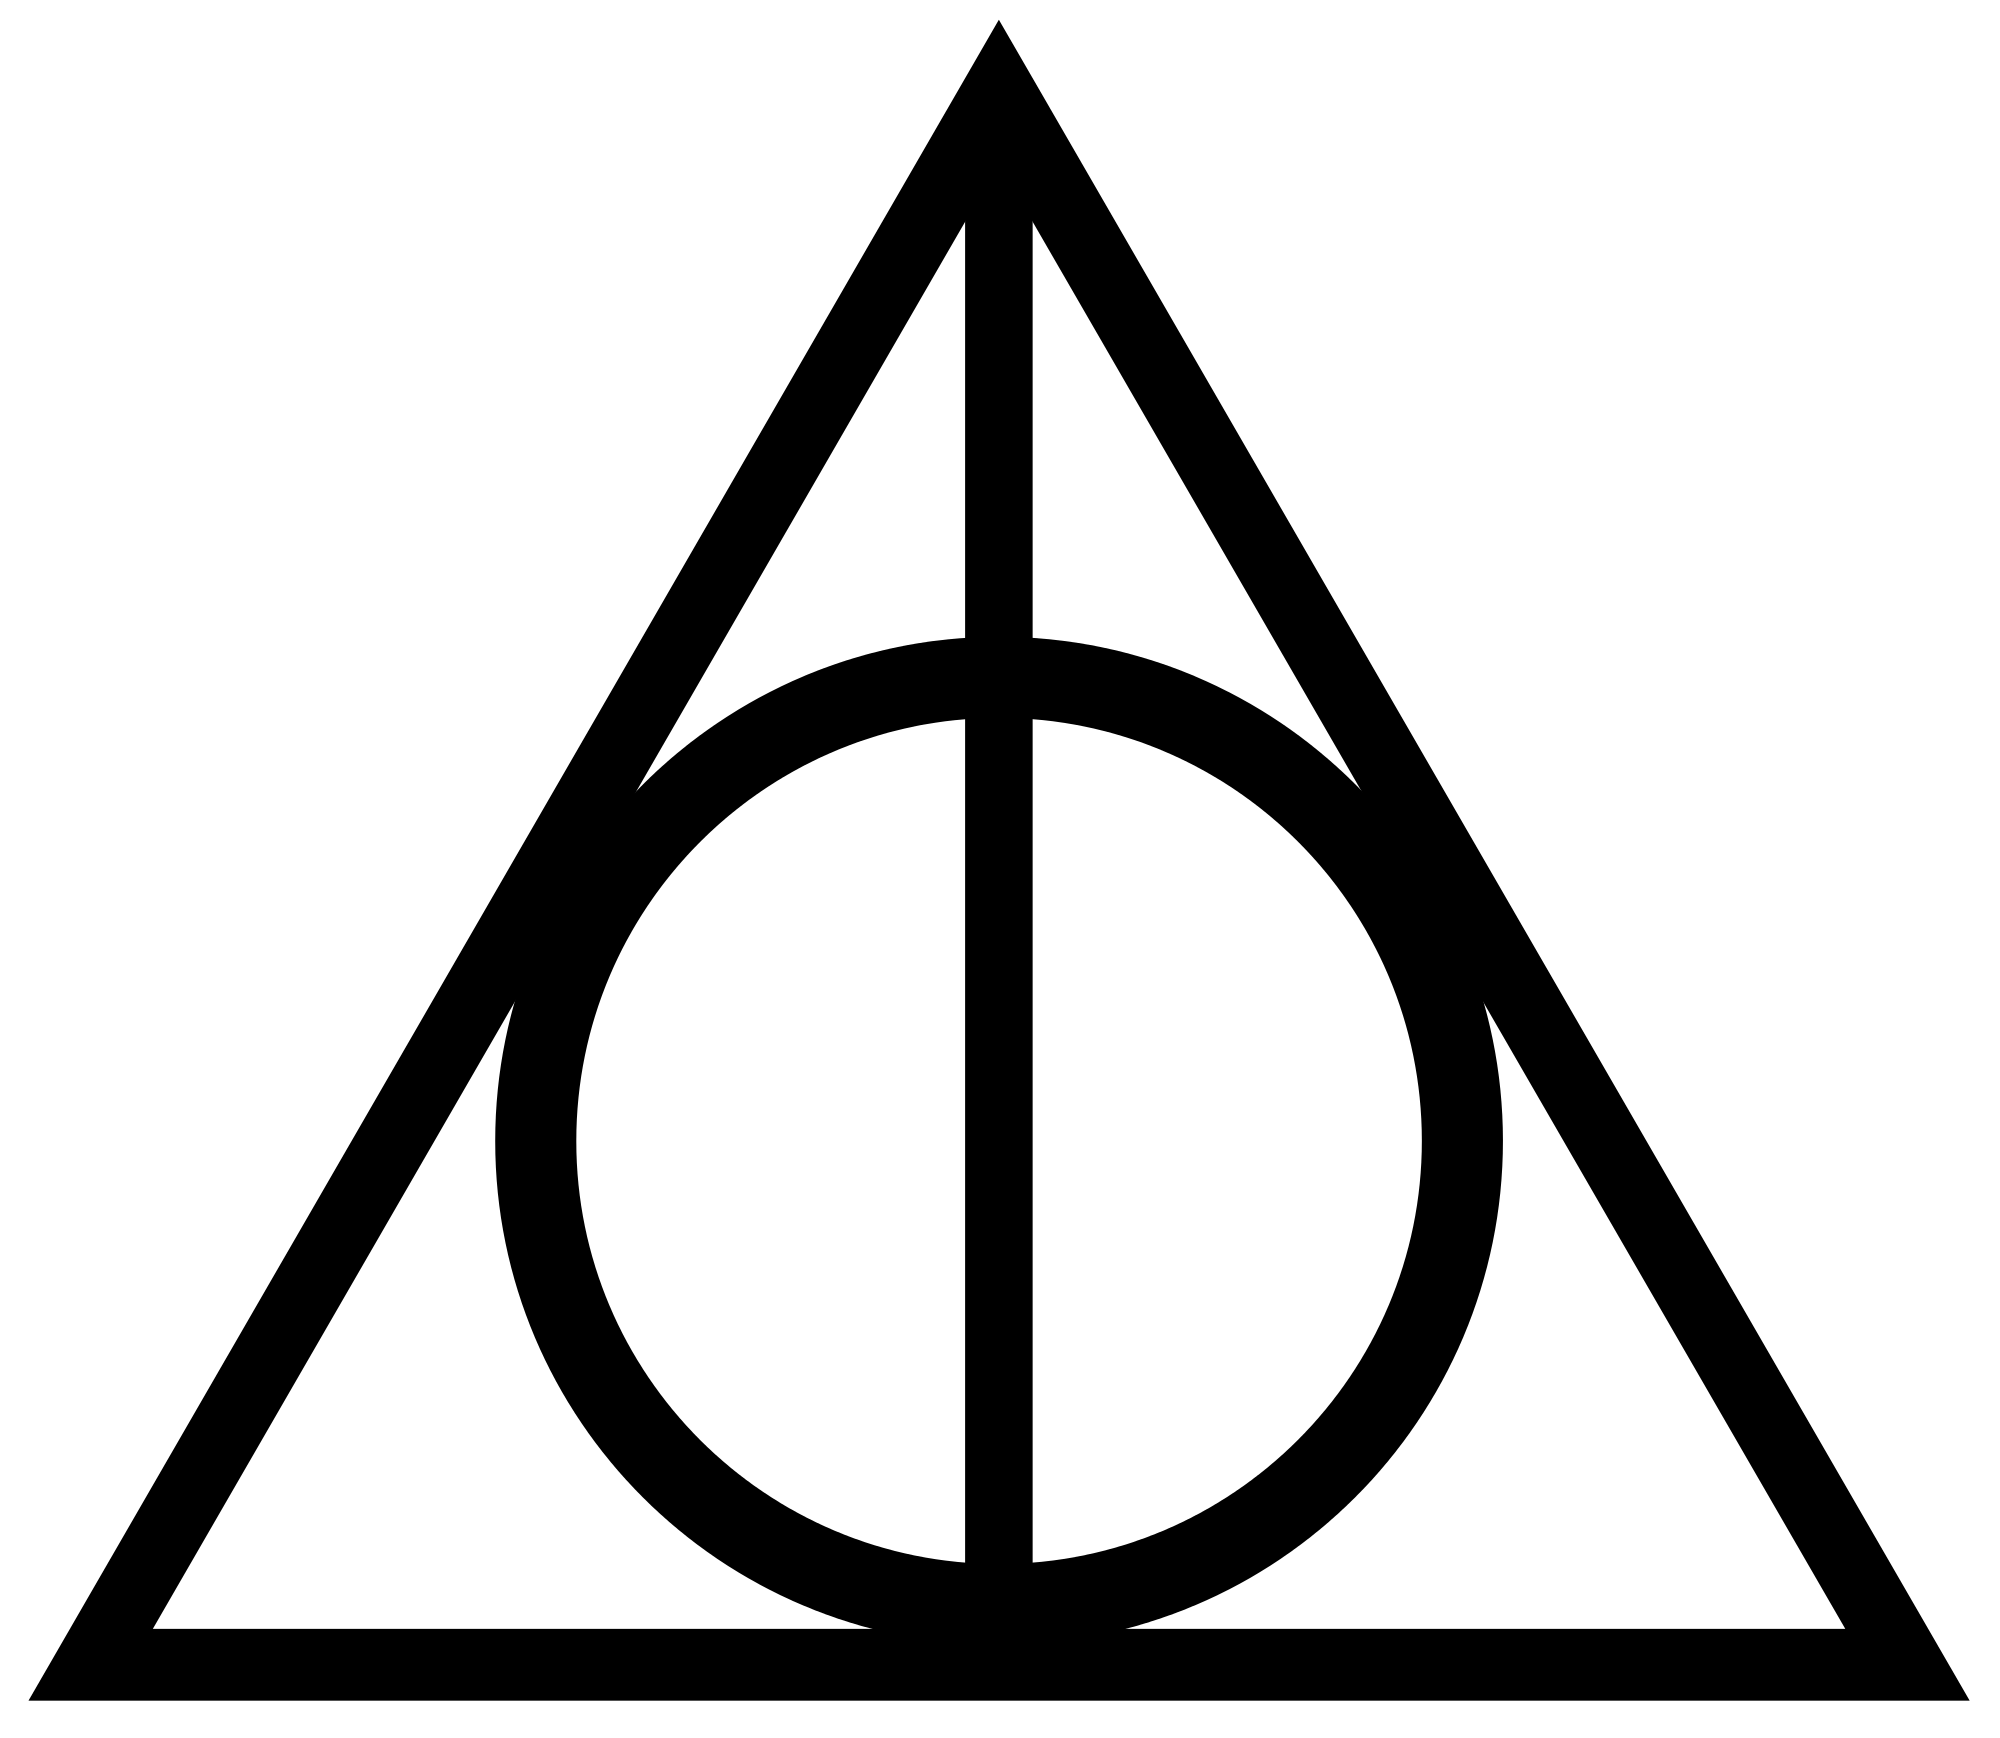 Triangle Harry Potter HP Logo - File:Deathly Hallows Sign.svg - Wikimedia Commons